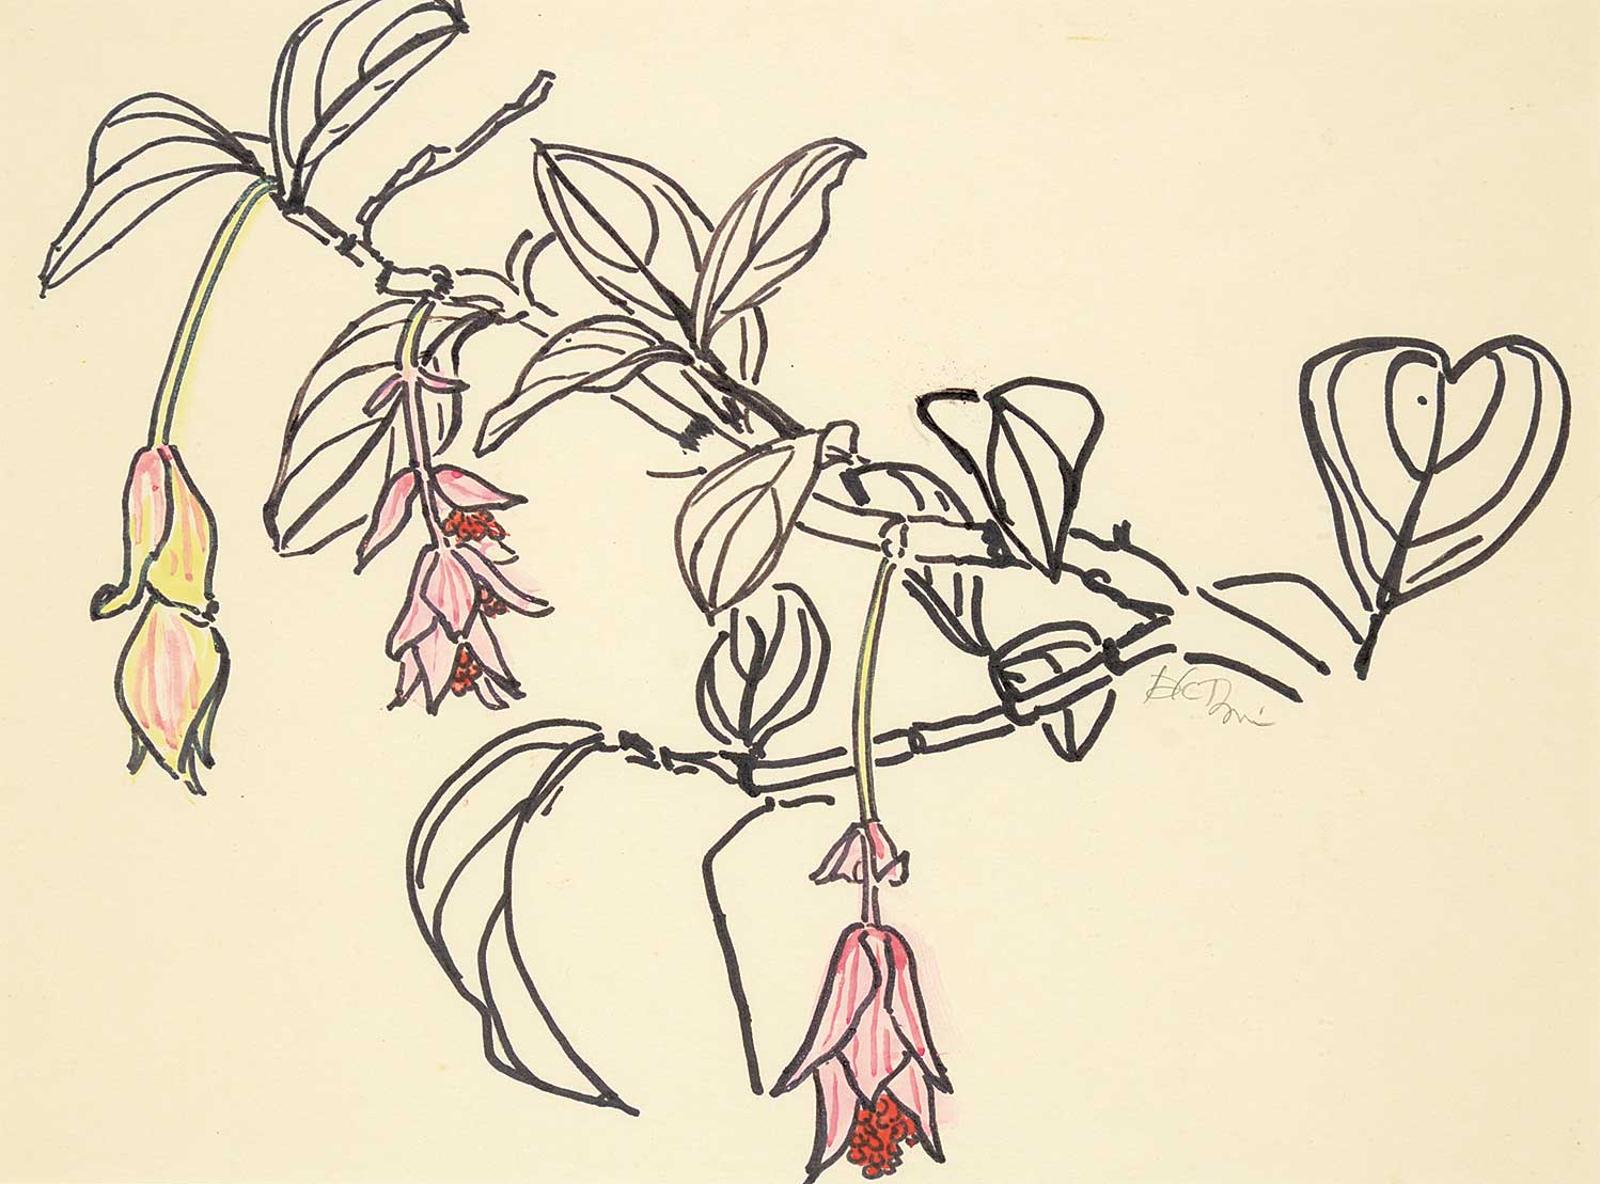 P.K. [Patricia Kathleen Page] Irwin - Untitled - Flowers on the Branch